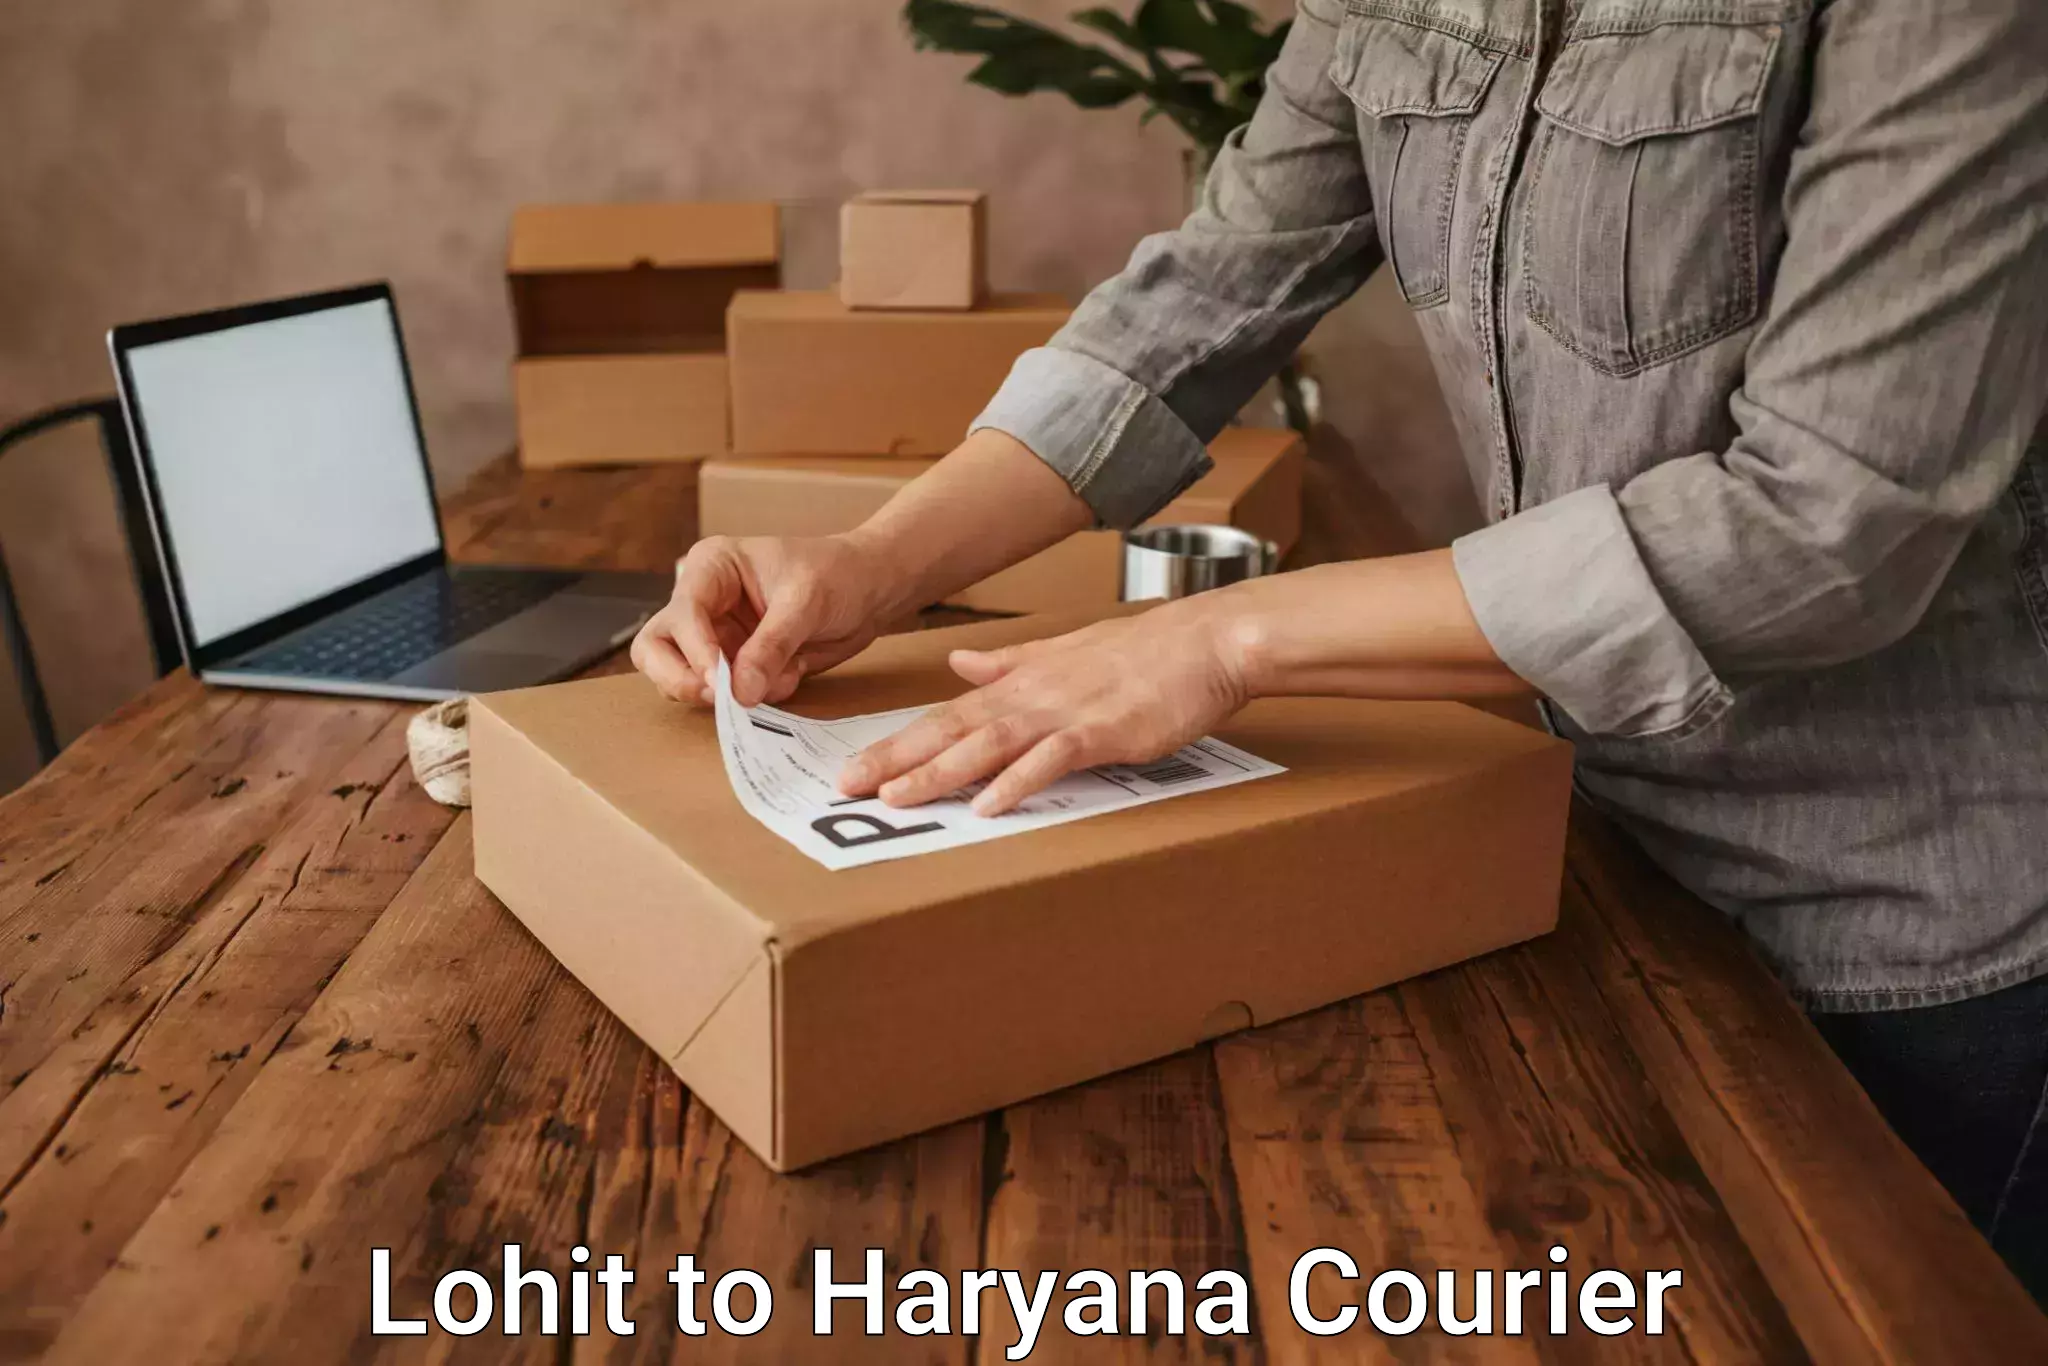 Advanced courier platforms Lohit to Faridabad